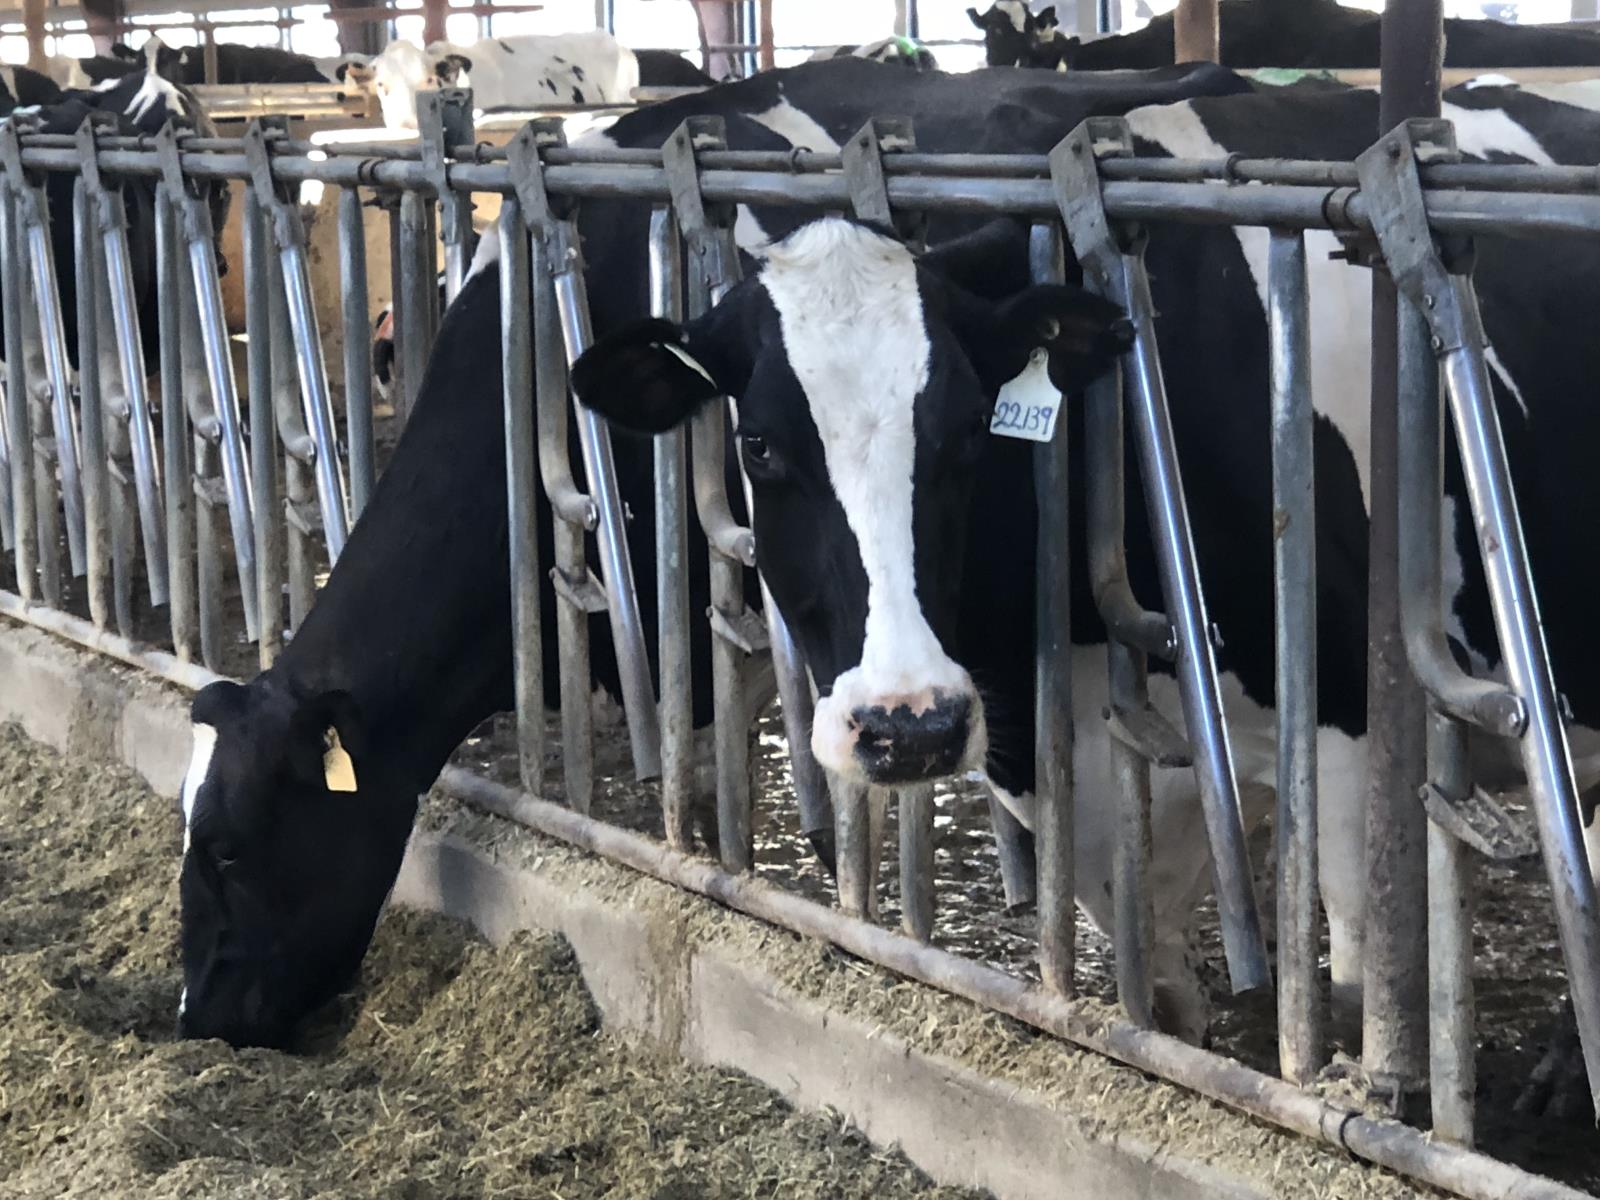 The price that Idaho dairy operators are receiving for their milk has decreased dramatically during the coronavirus outbreak. 